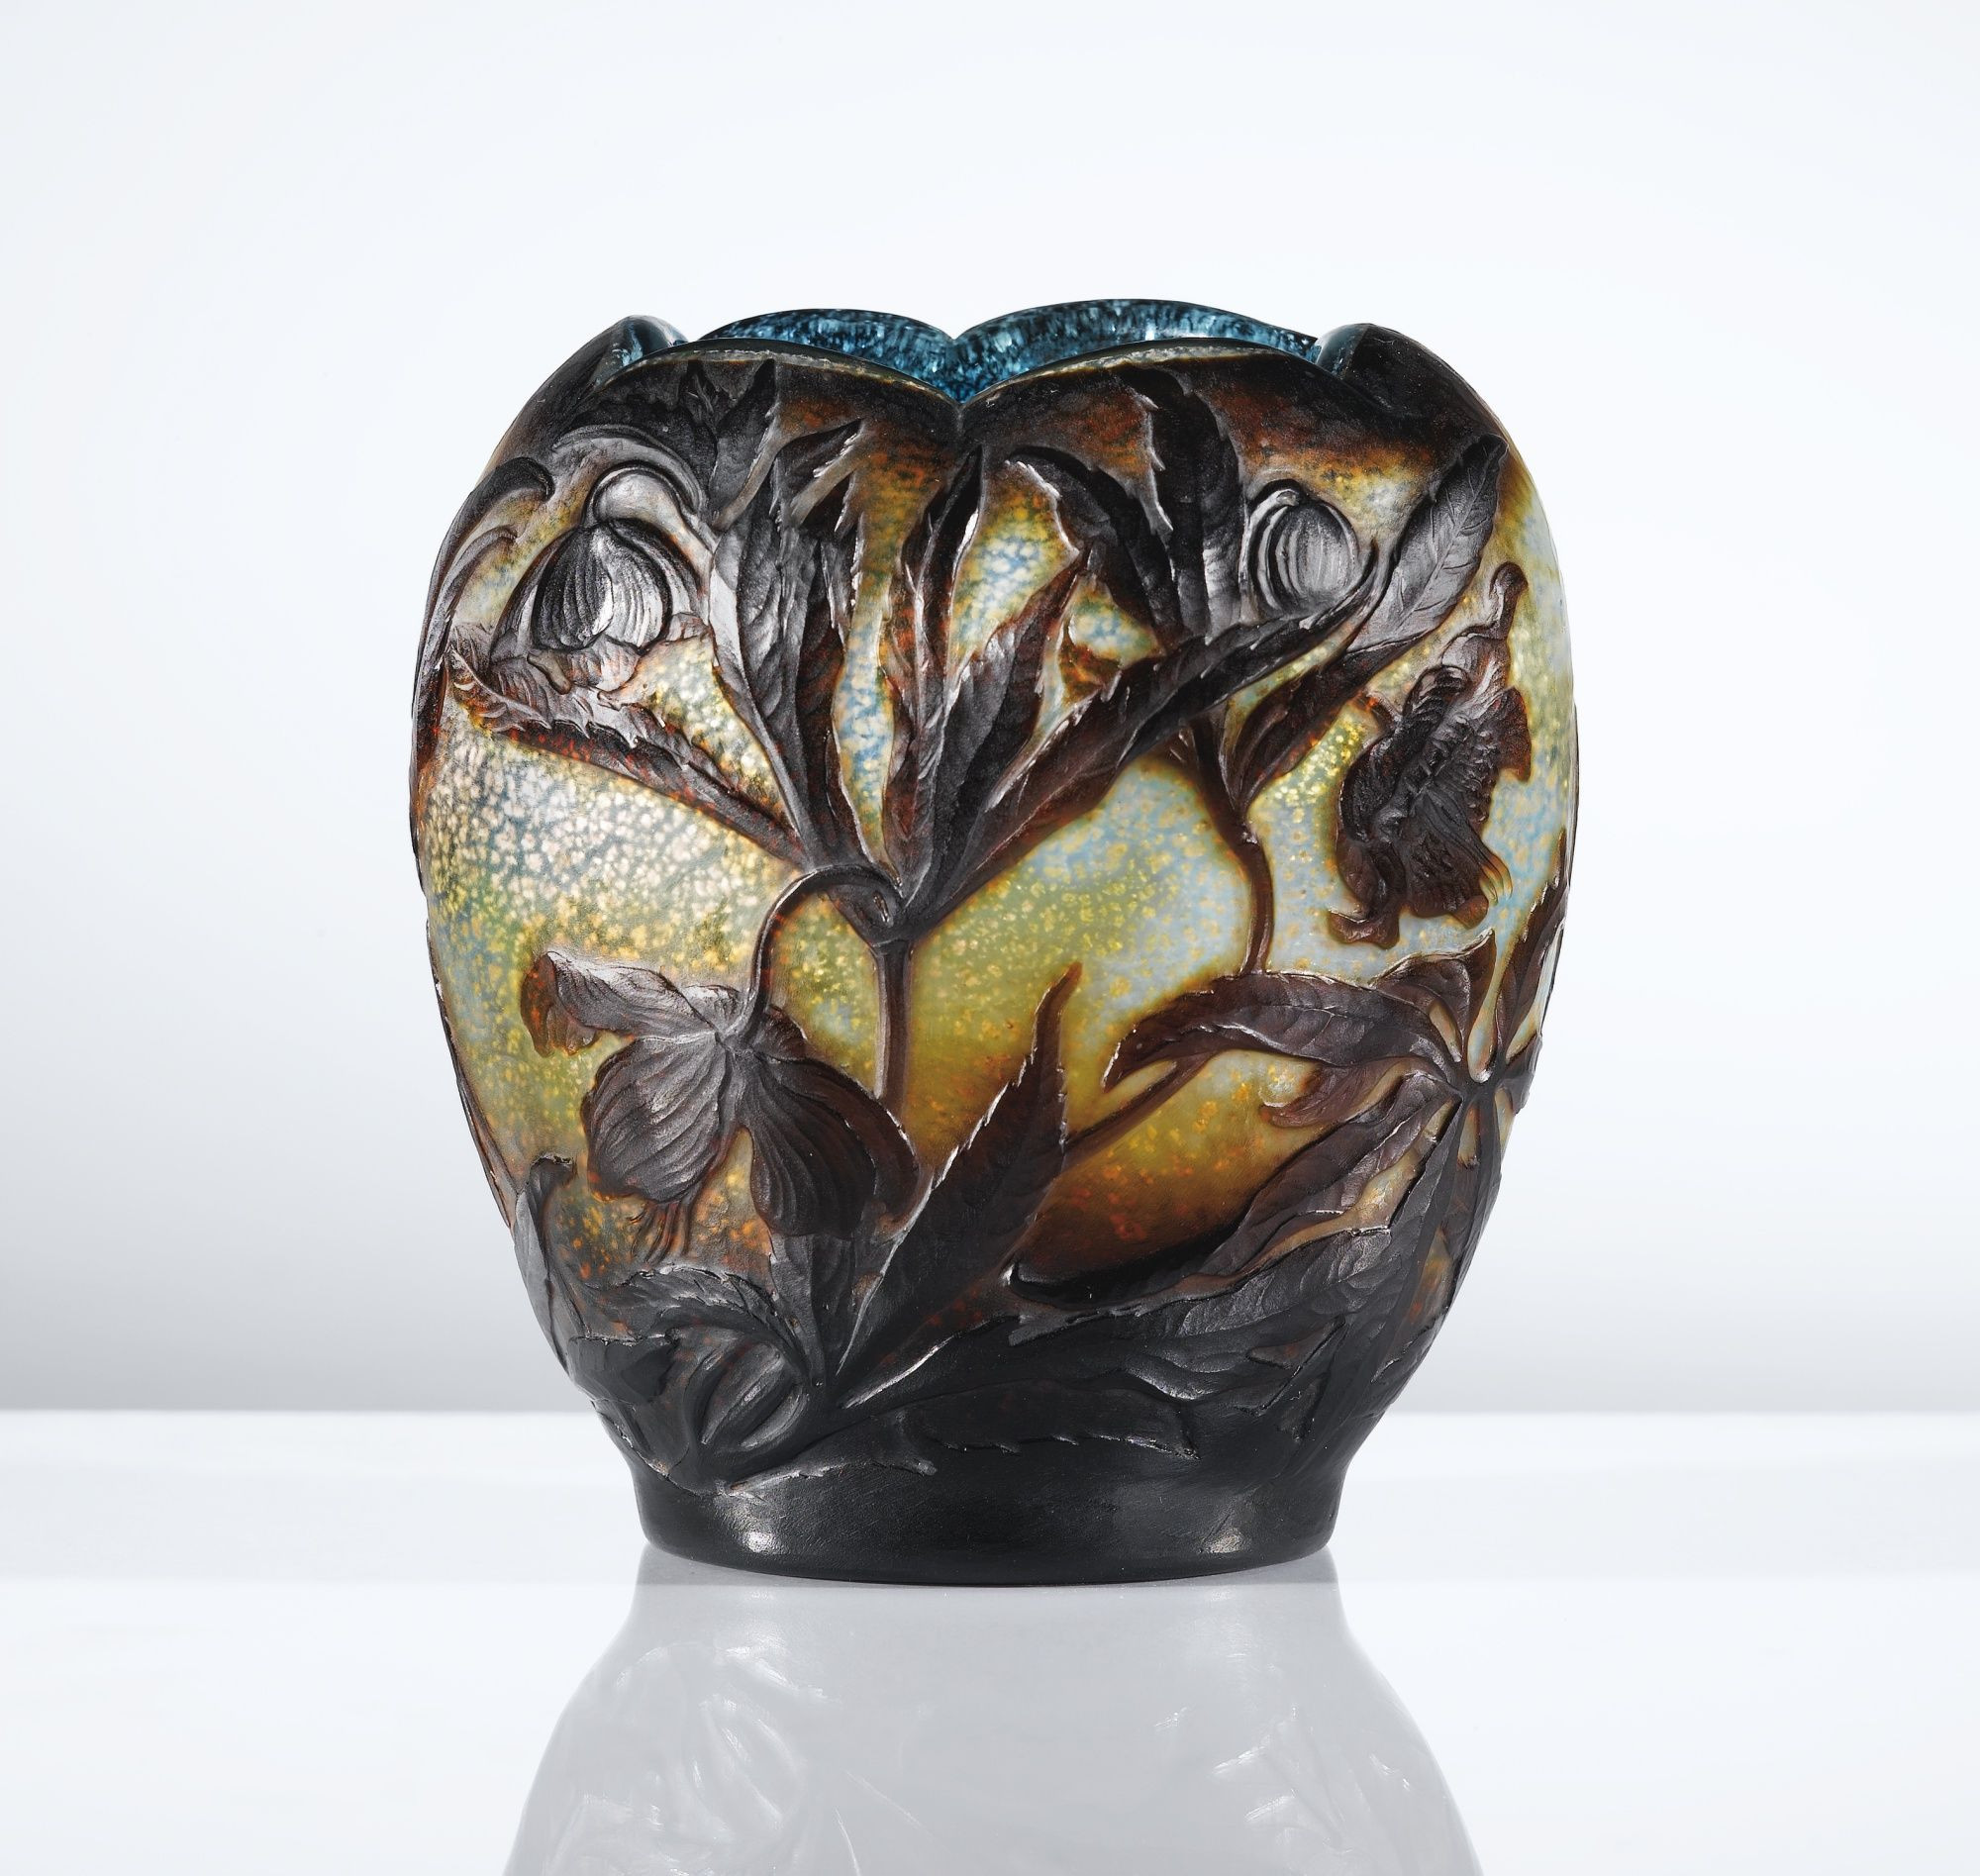 cameo glass vase of emile galla vase aux hellabores vers 1902 1904 a wheel carved pertaining to emile galla vase aux hellabores vers 1902 1904 a wheel